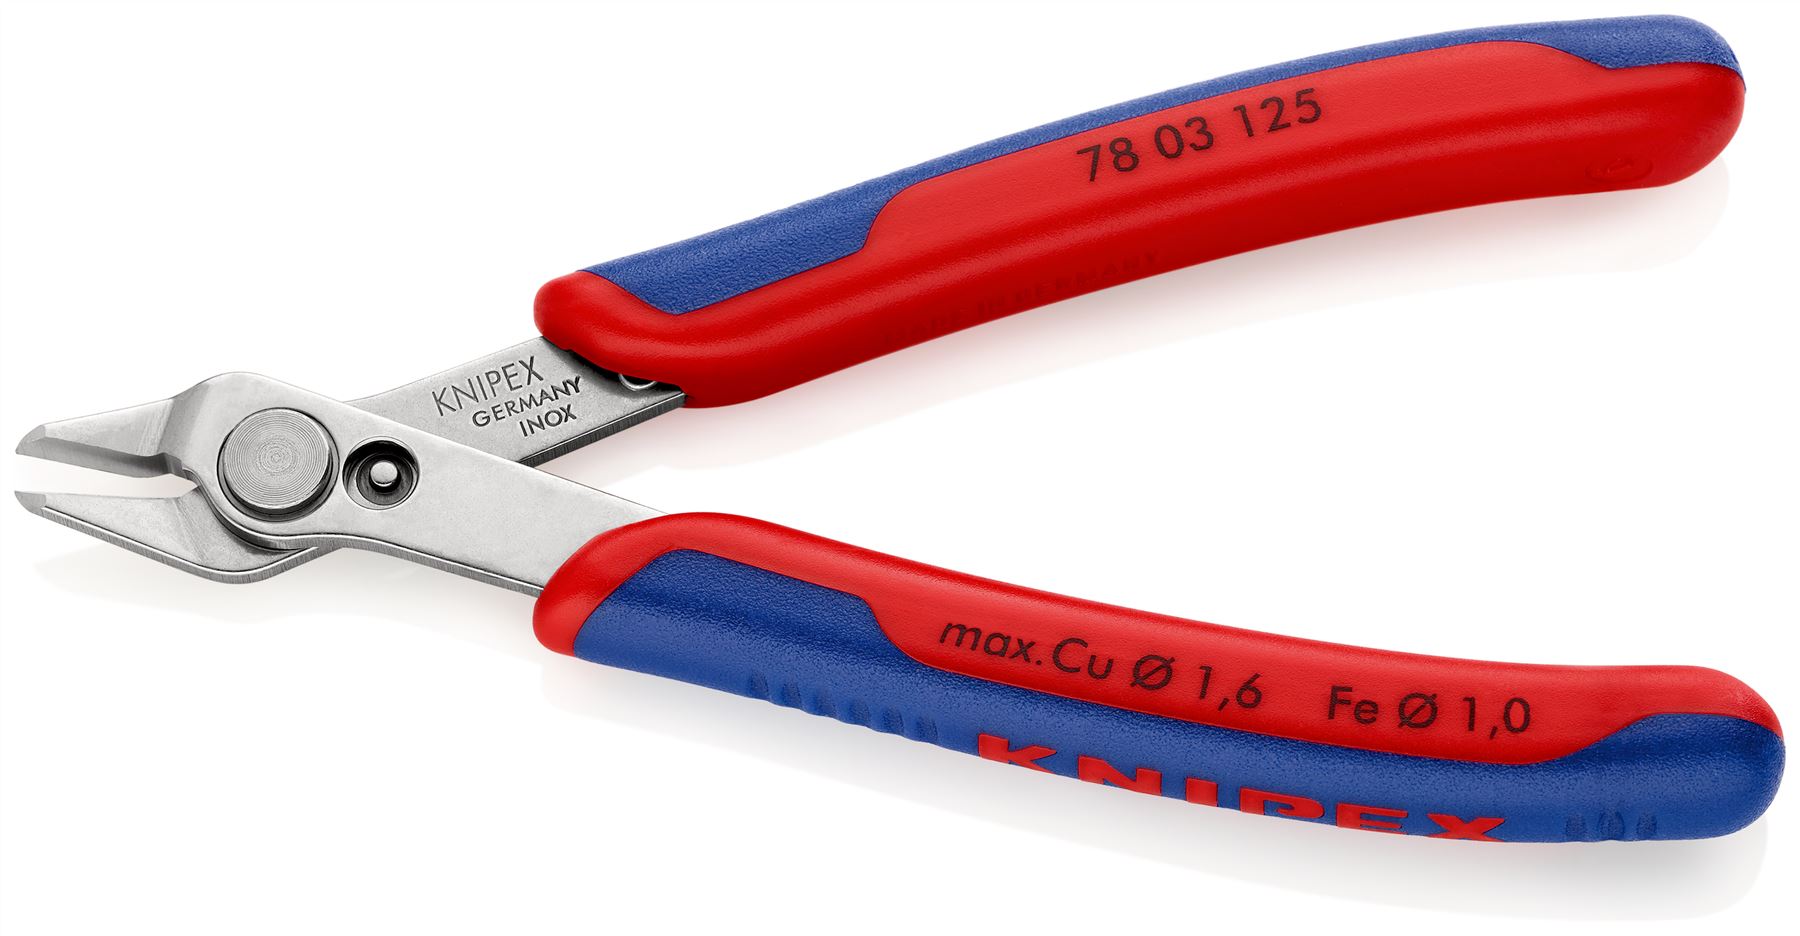 Knipex Electronic Super Knips 125mm Multi Component Grips Fine Cutting Pliers78 03 125